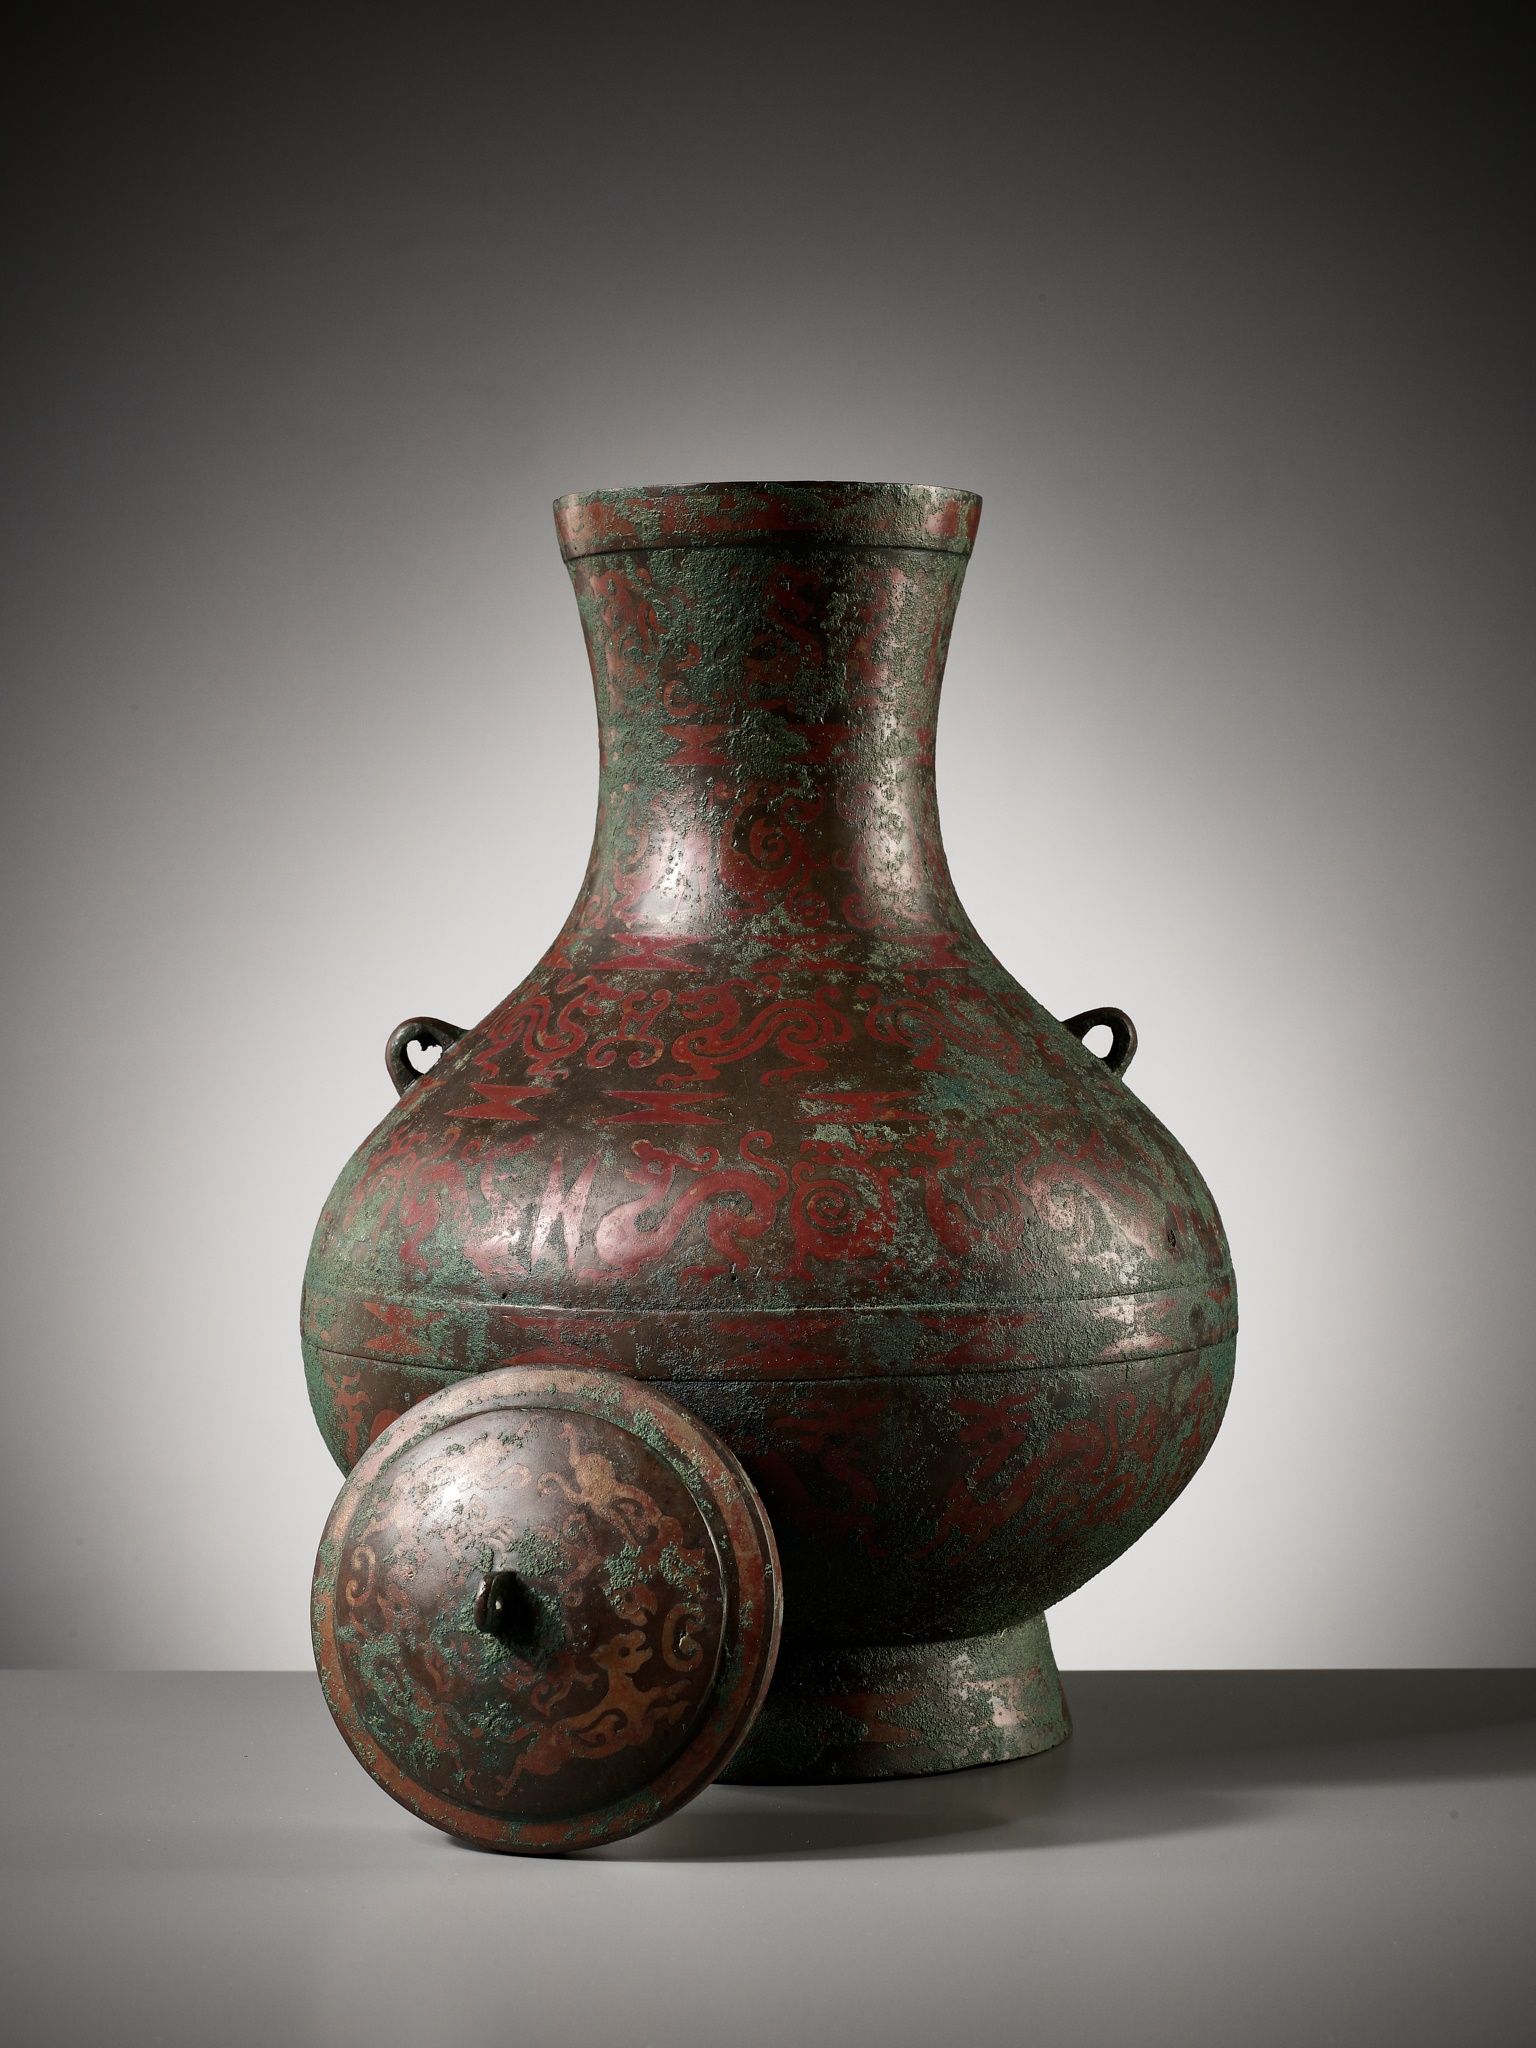 A COPPER-INLAID BRONZE RITUAL WINE VESSEL AND COVER, HU, EASTERN ZHOU DYNASTY - Image 3 of 27